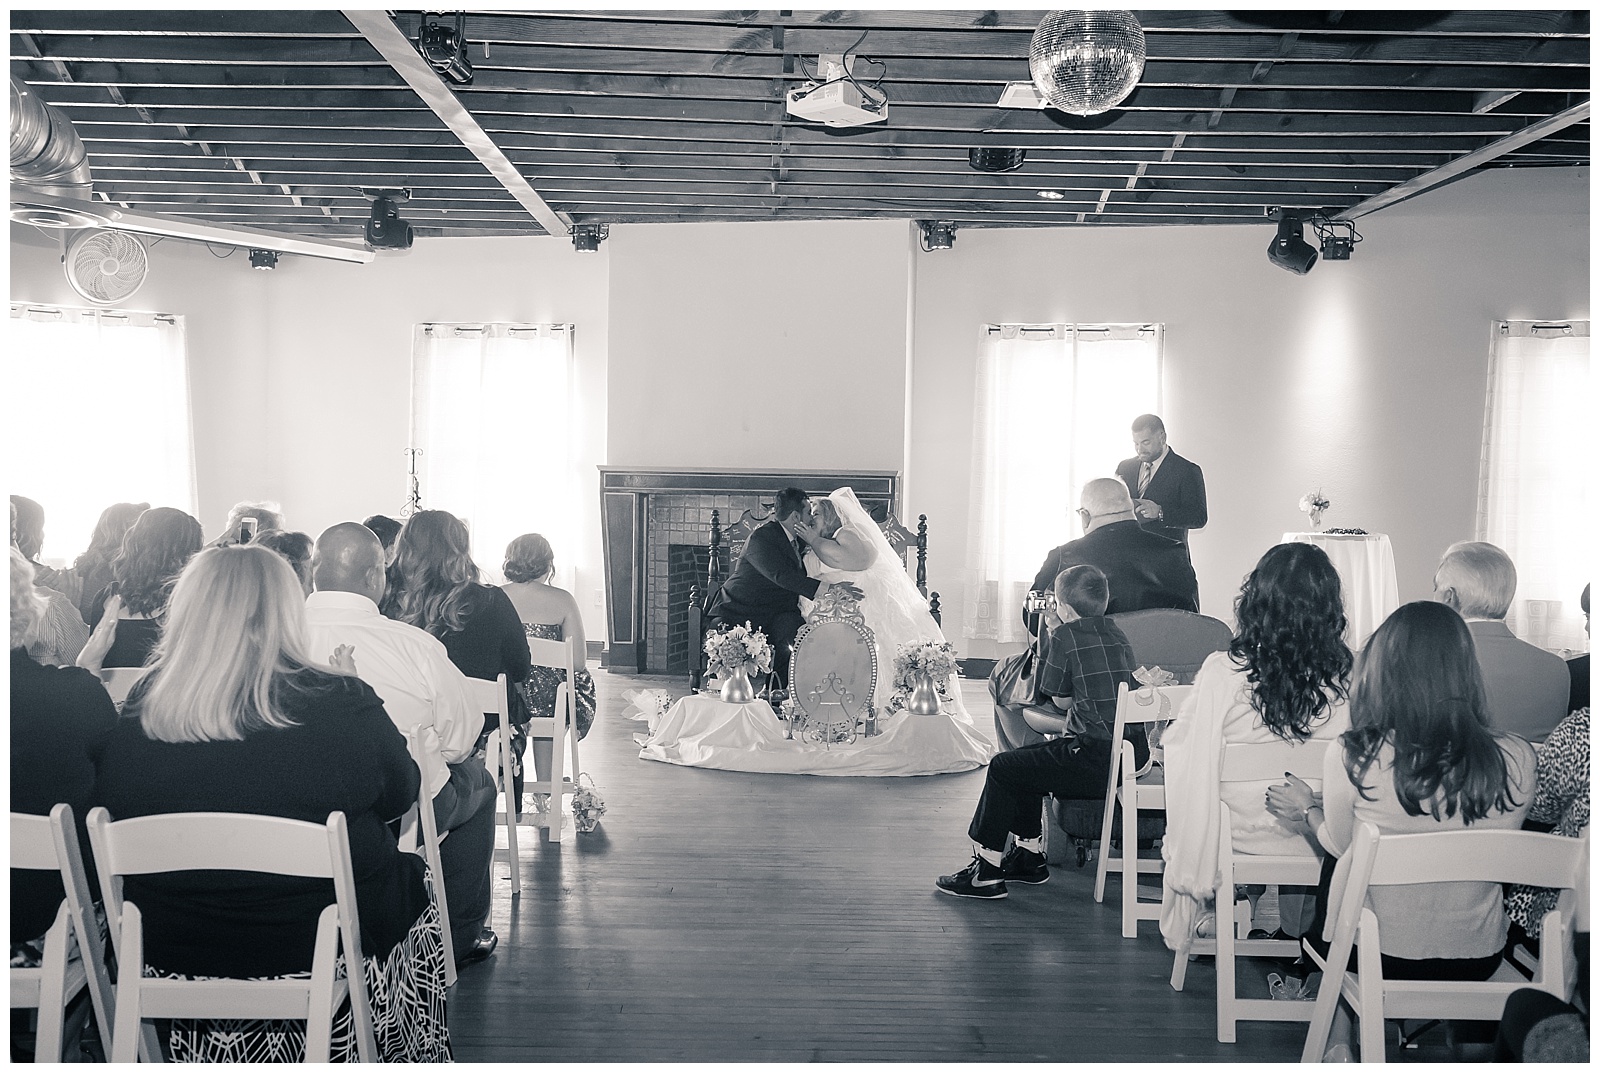 Wedding photography at Armour Theatre in Kansas City.